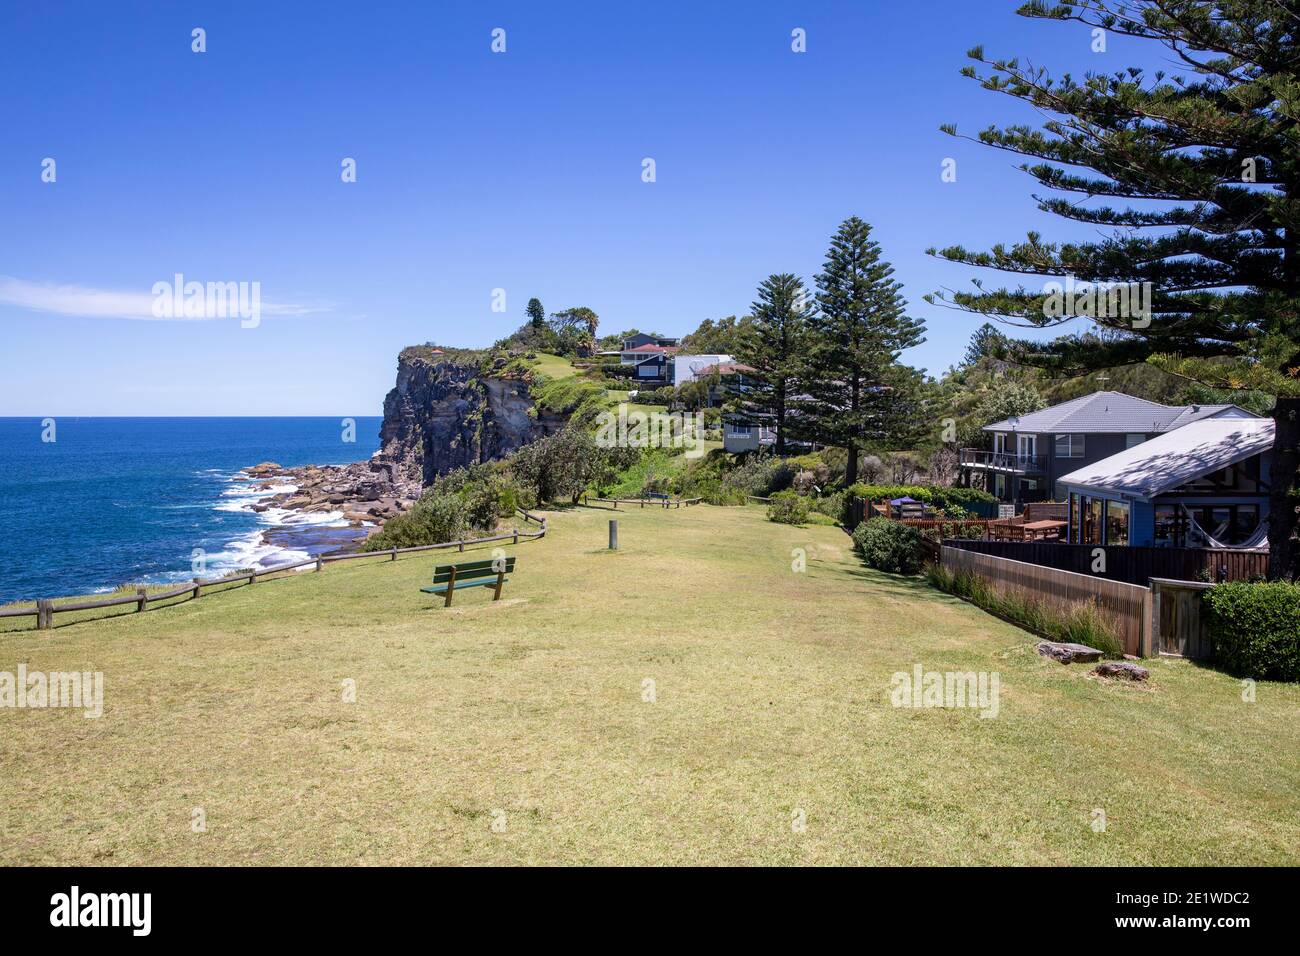 Bangalley head and Bangalley reserve between Whale Beach and Avalon Beach in Sydney, formed in the jurassic era and a popular bush walking route Stock Photo